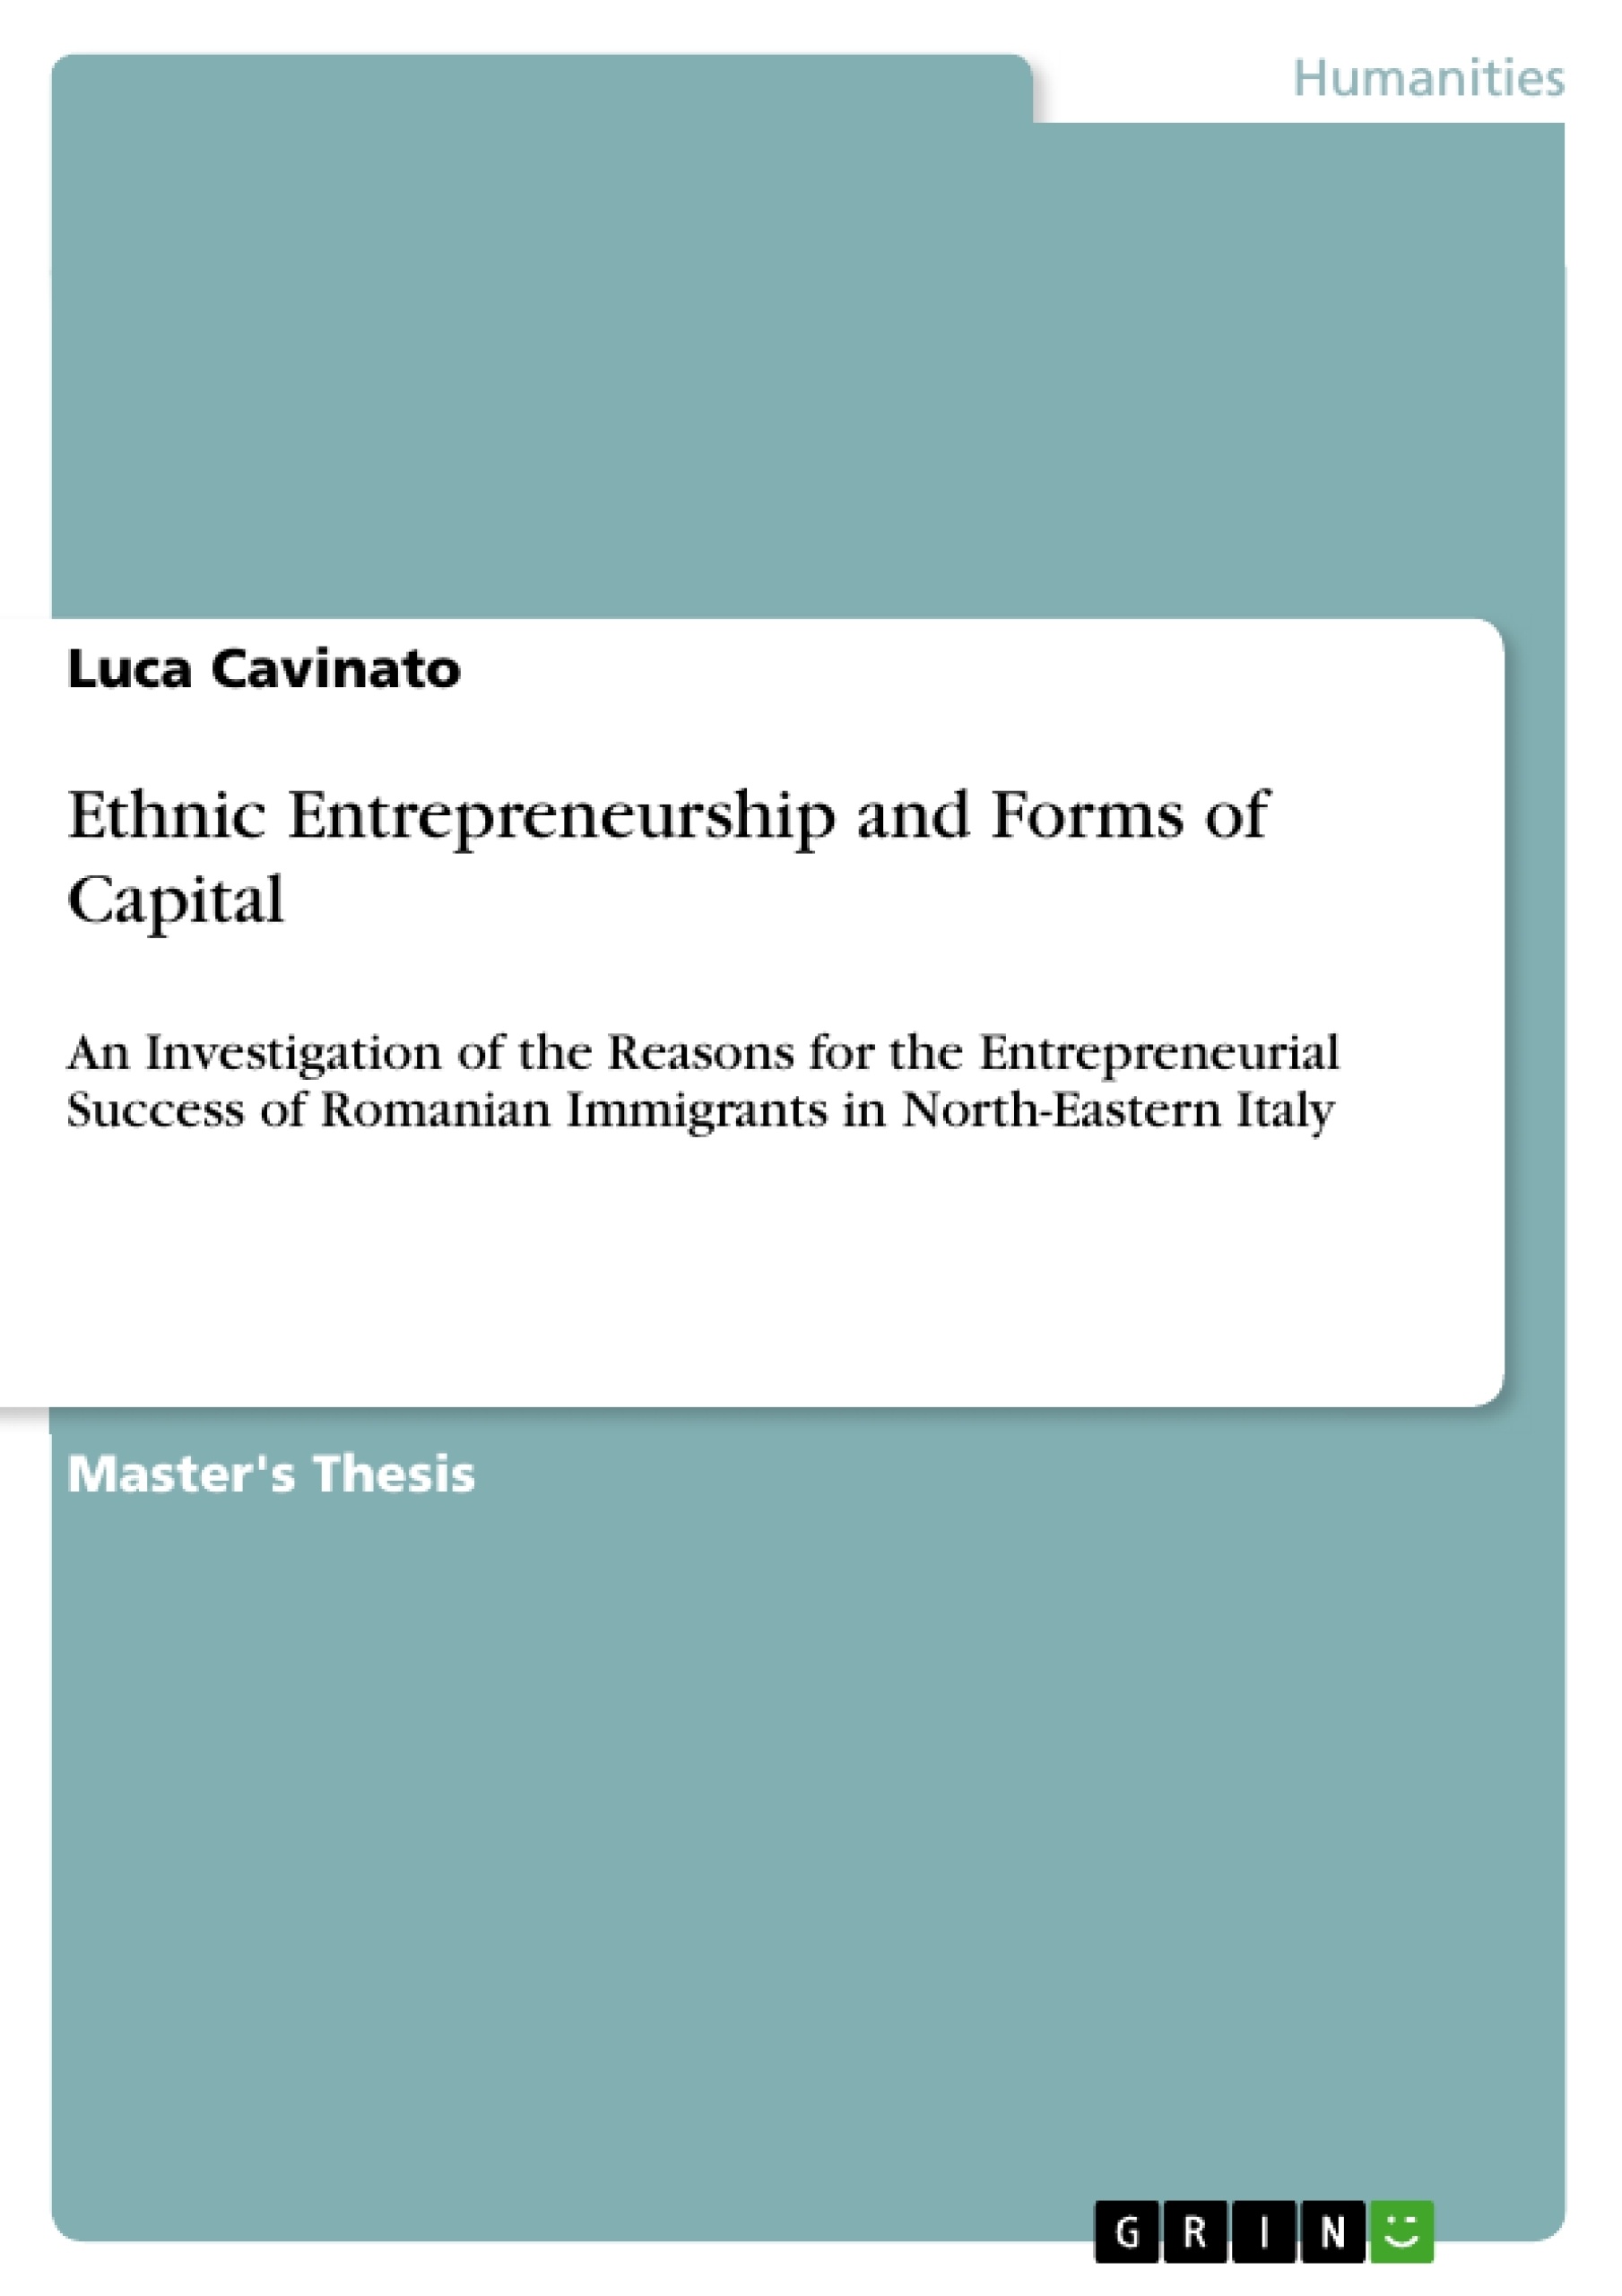 Título: Ethnic Entrepreneurship and Forms of Capital